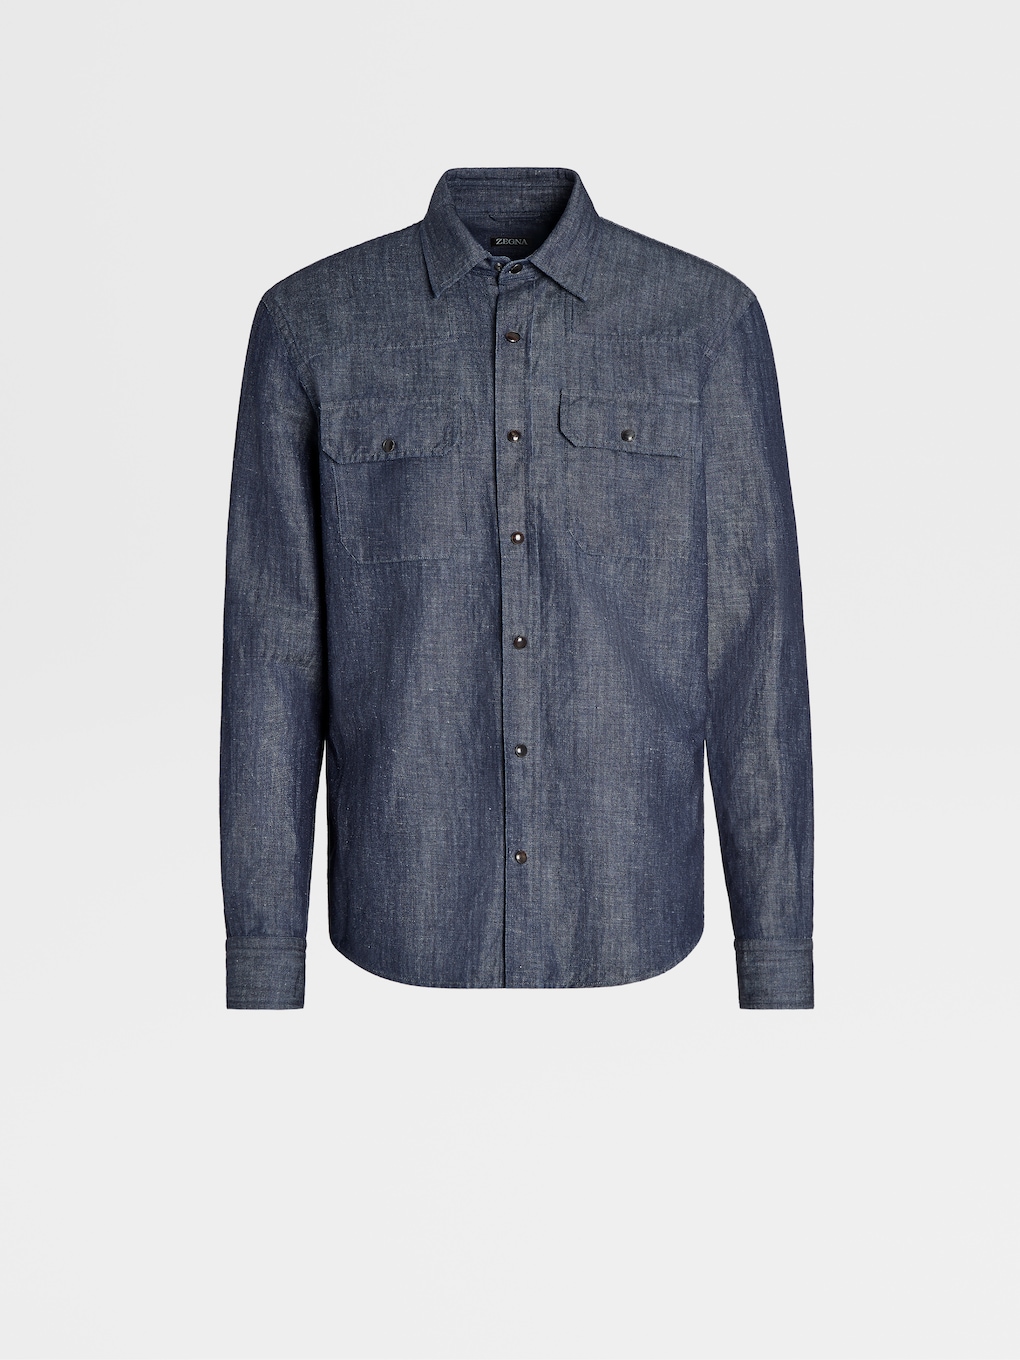 Ink Blue Cotton and Linen Rinse Washed Denim Long-sleeve Shirt